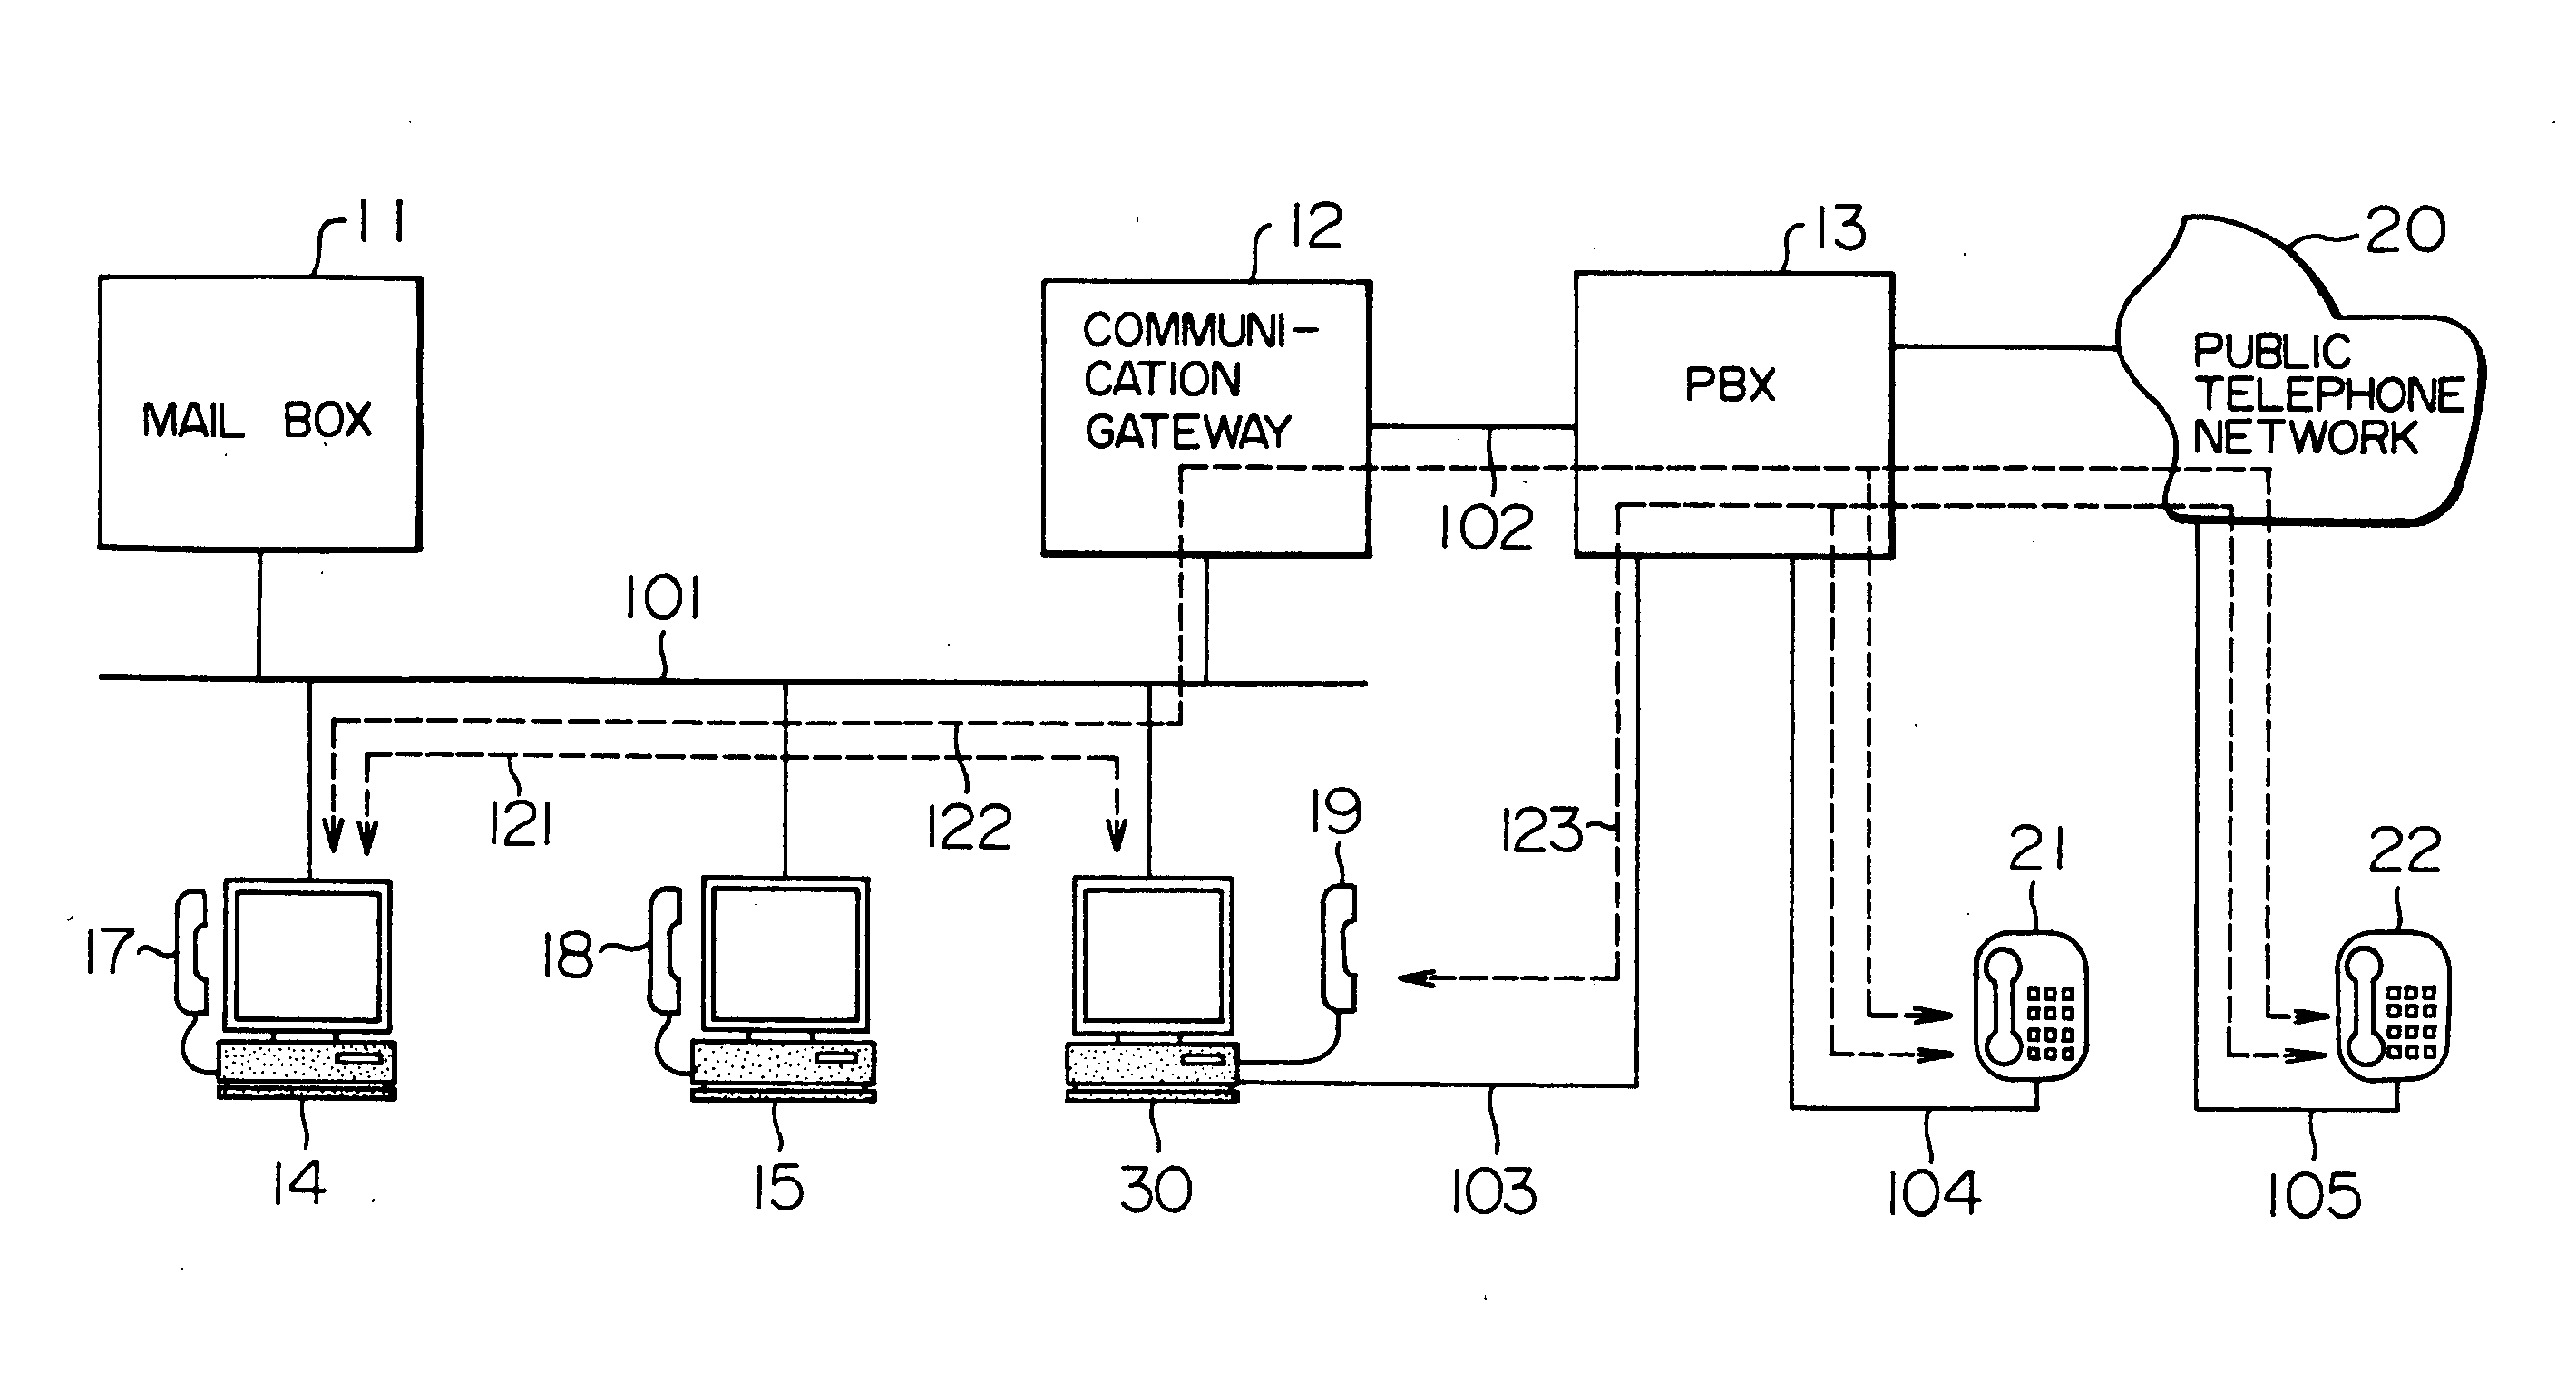 Packet communication system